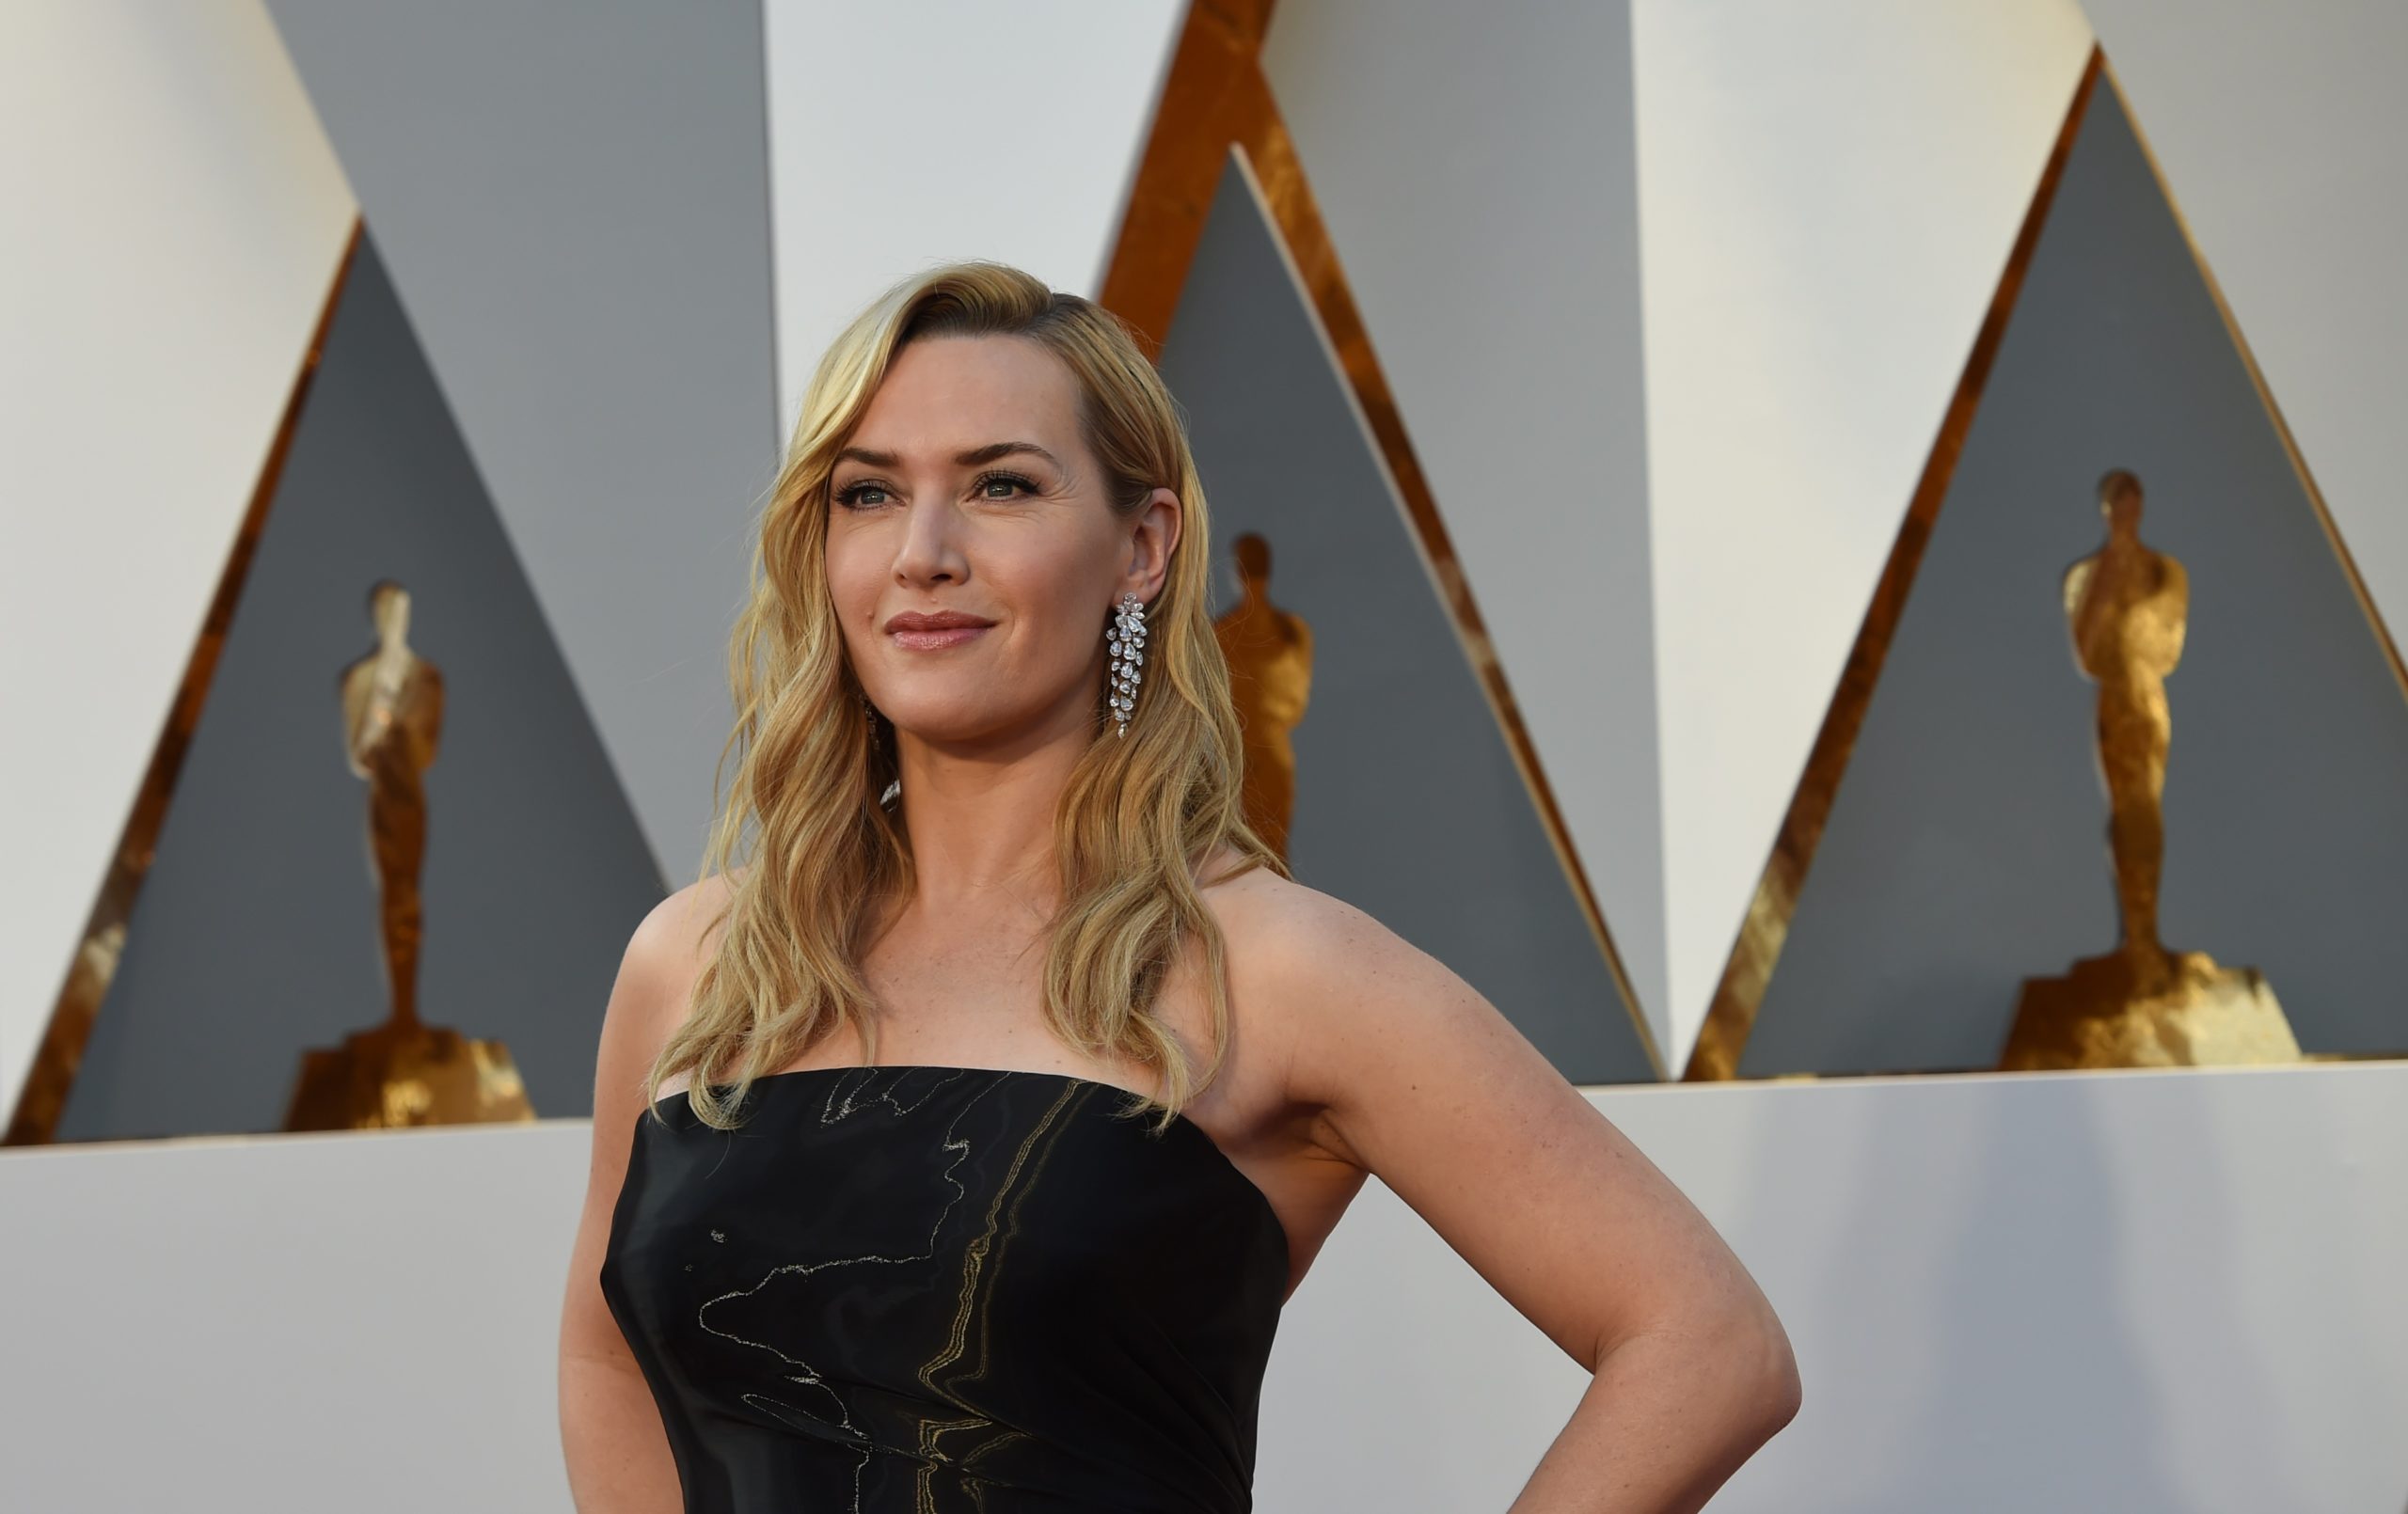 88th Annual Academy Awards - Kate Winslet